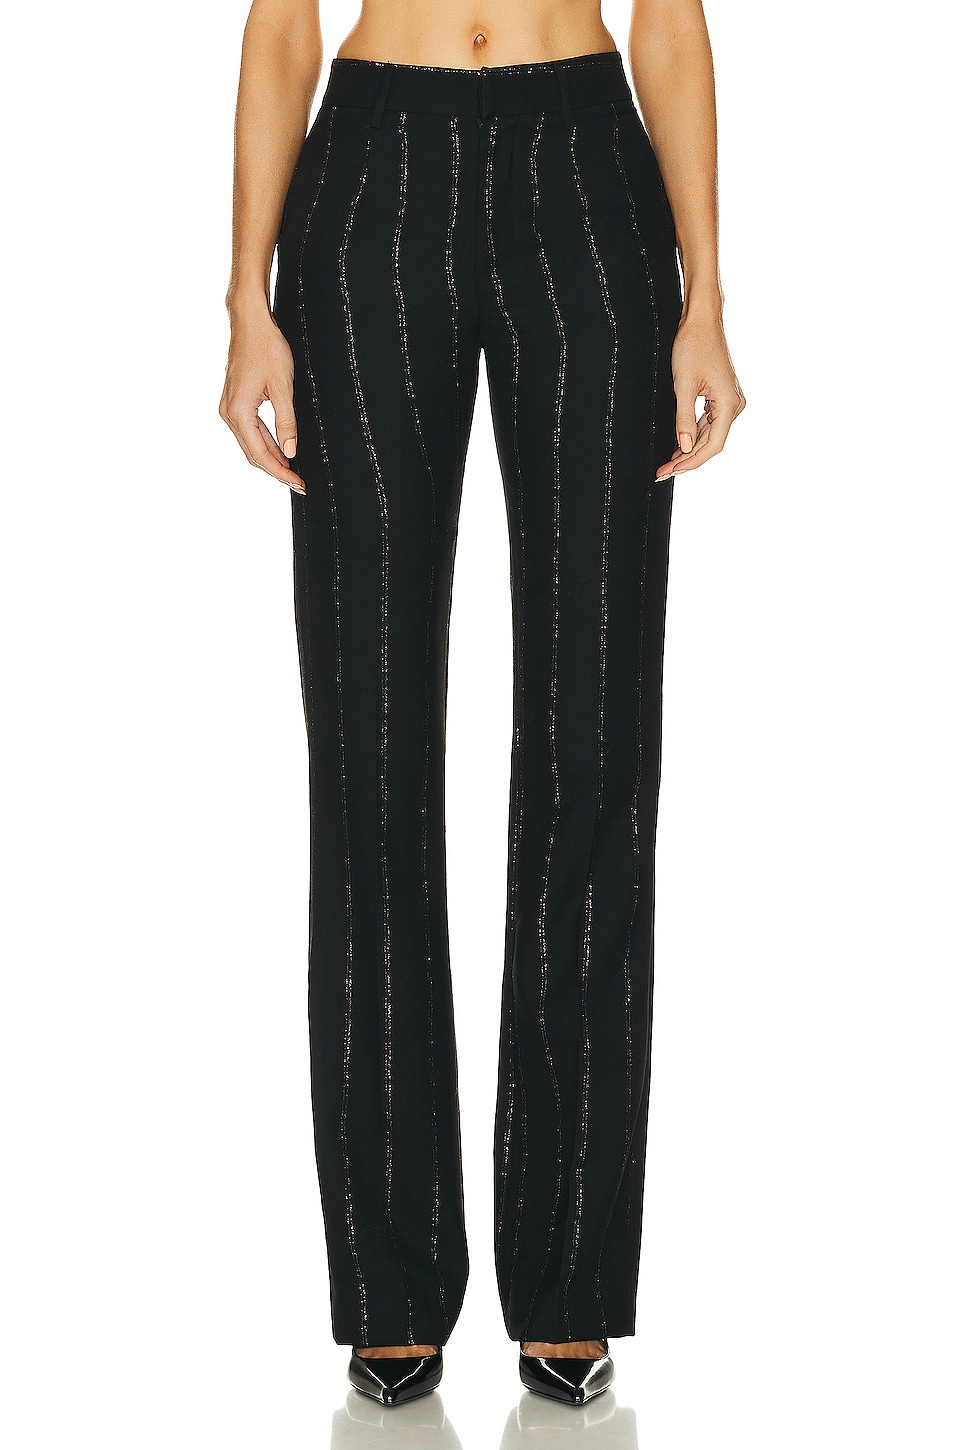 Image 1 of Alessandra Rich Lurex Pinstripe Trousers in Black &Gold